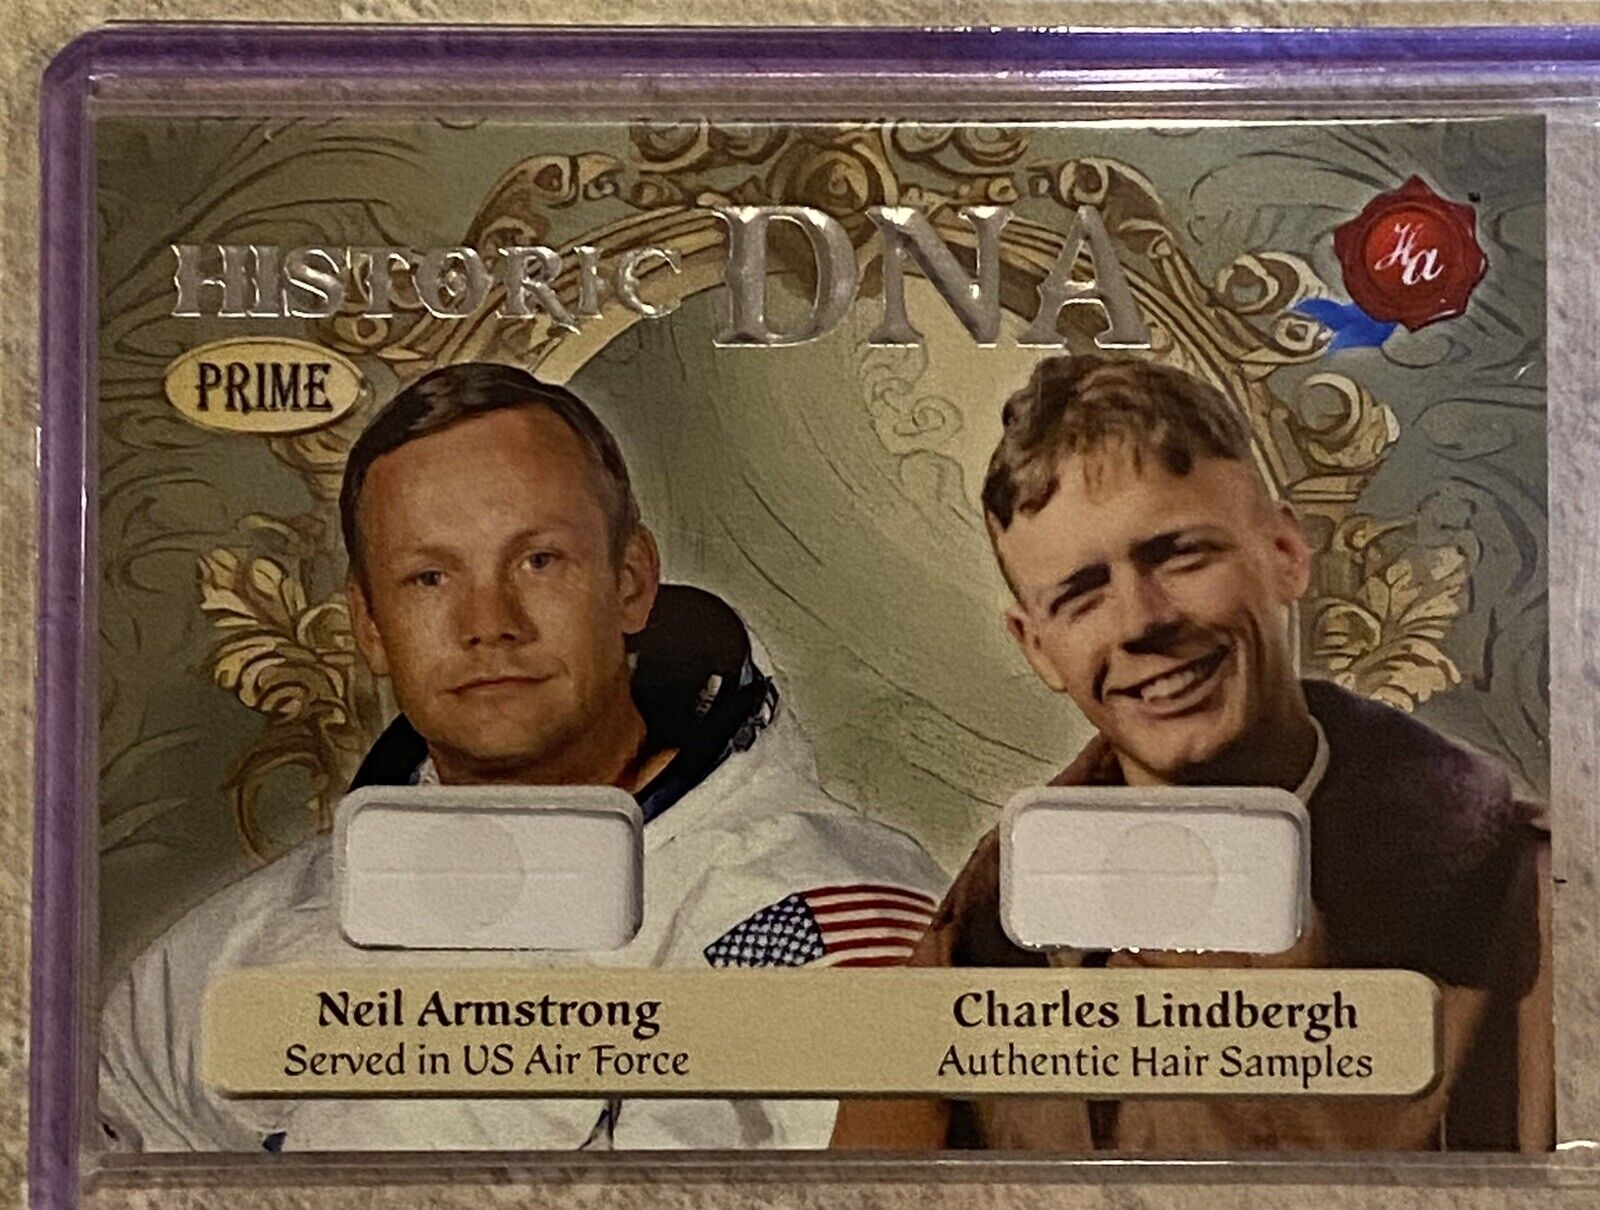 2024 HISTORIC AUTOGRAPHS PRIME NEIL ARMSTRONG CHARLES LINDBERG DUAL DNA RELIC